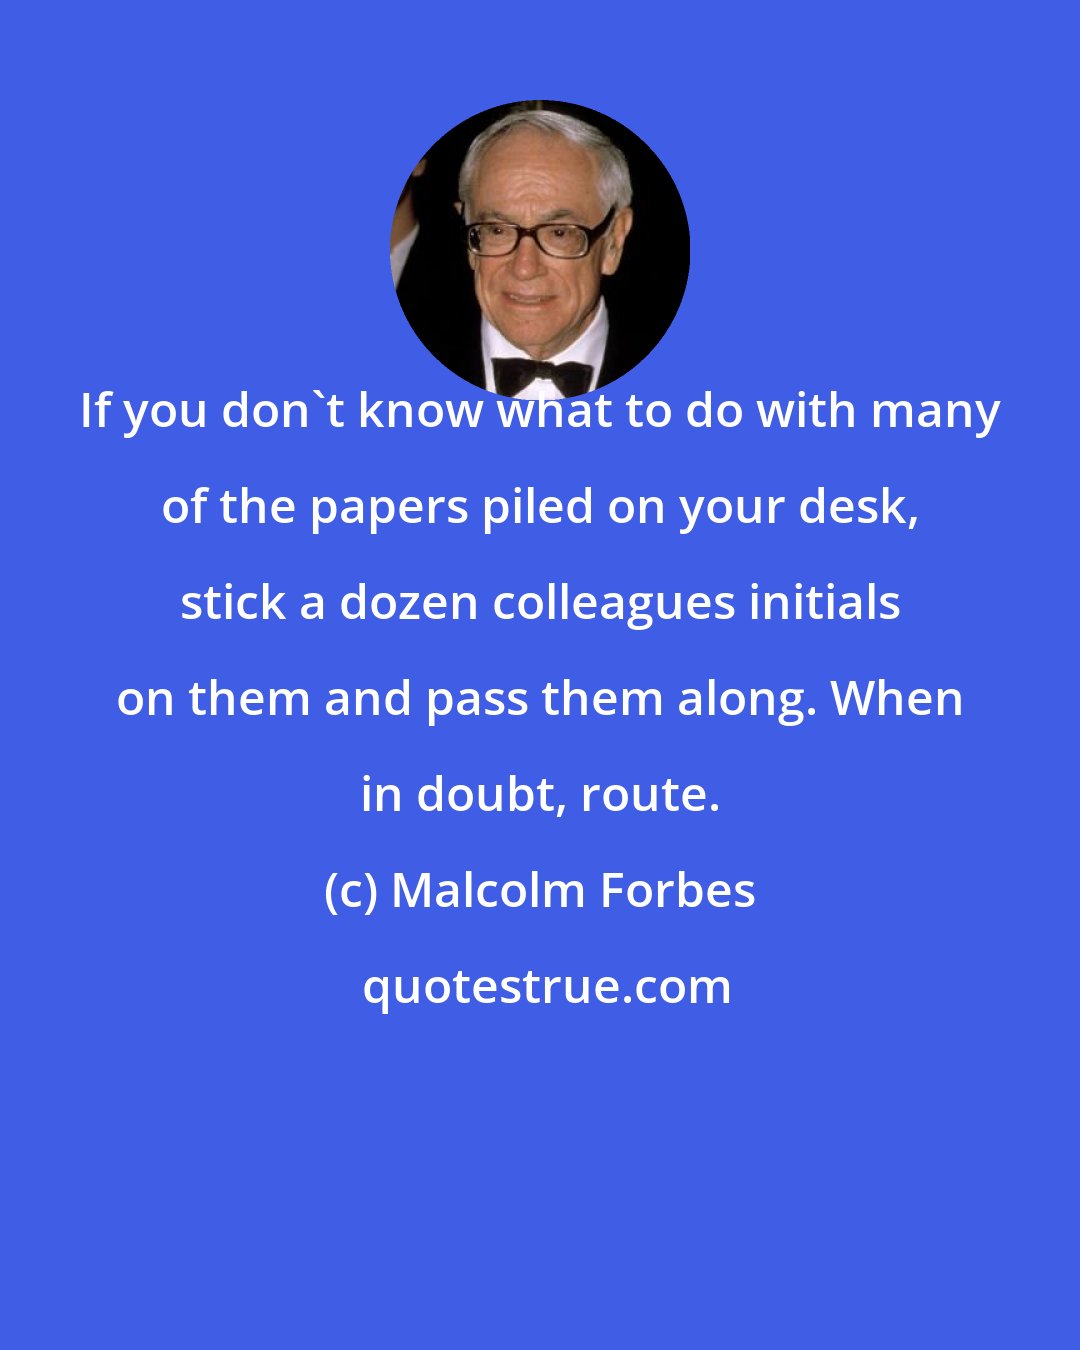 Malcolm Forbes: If you don't know what to do with many of the papers piled on your desk, stick a dozen colleagues initials on them and pass them along. When in doubt, route.